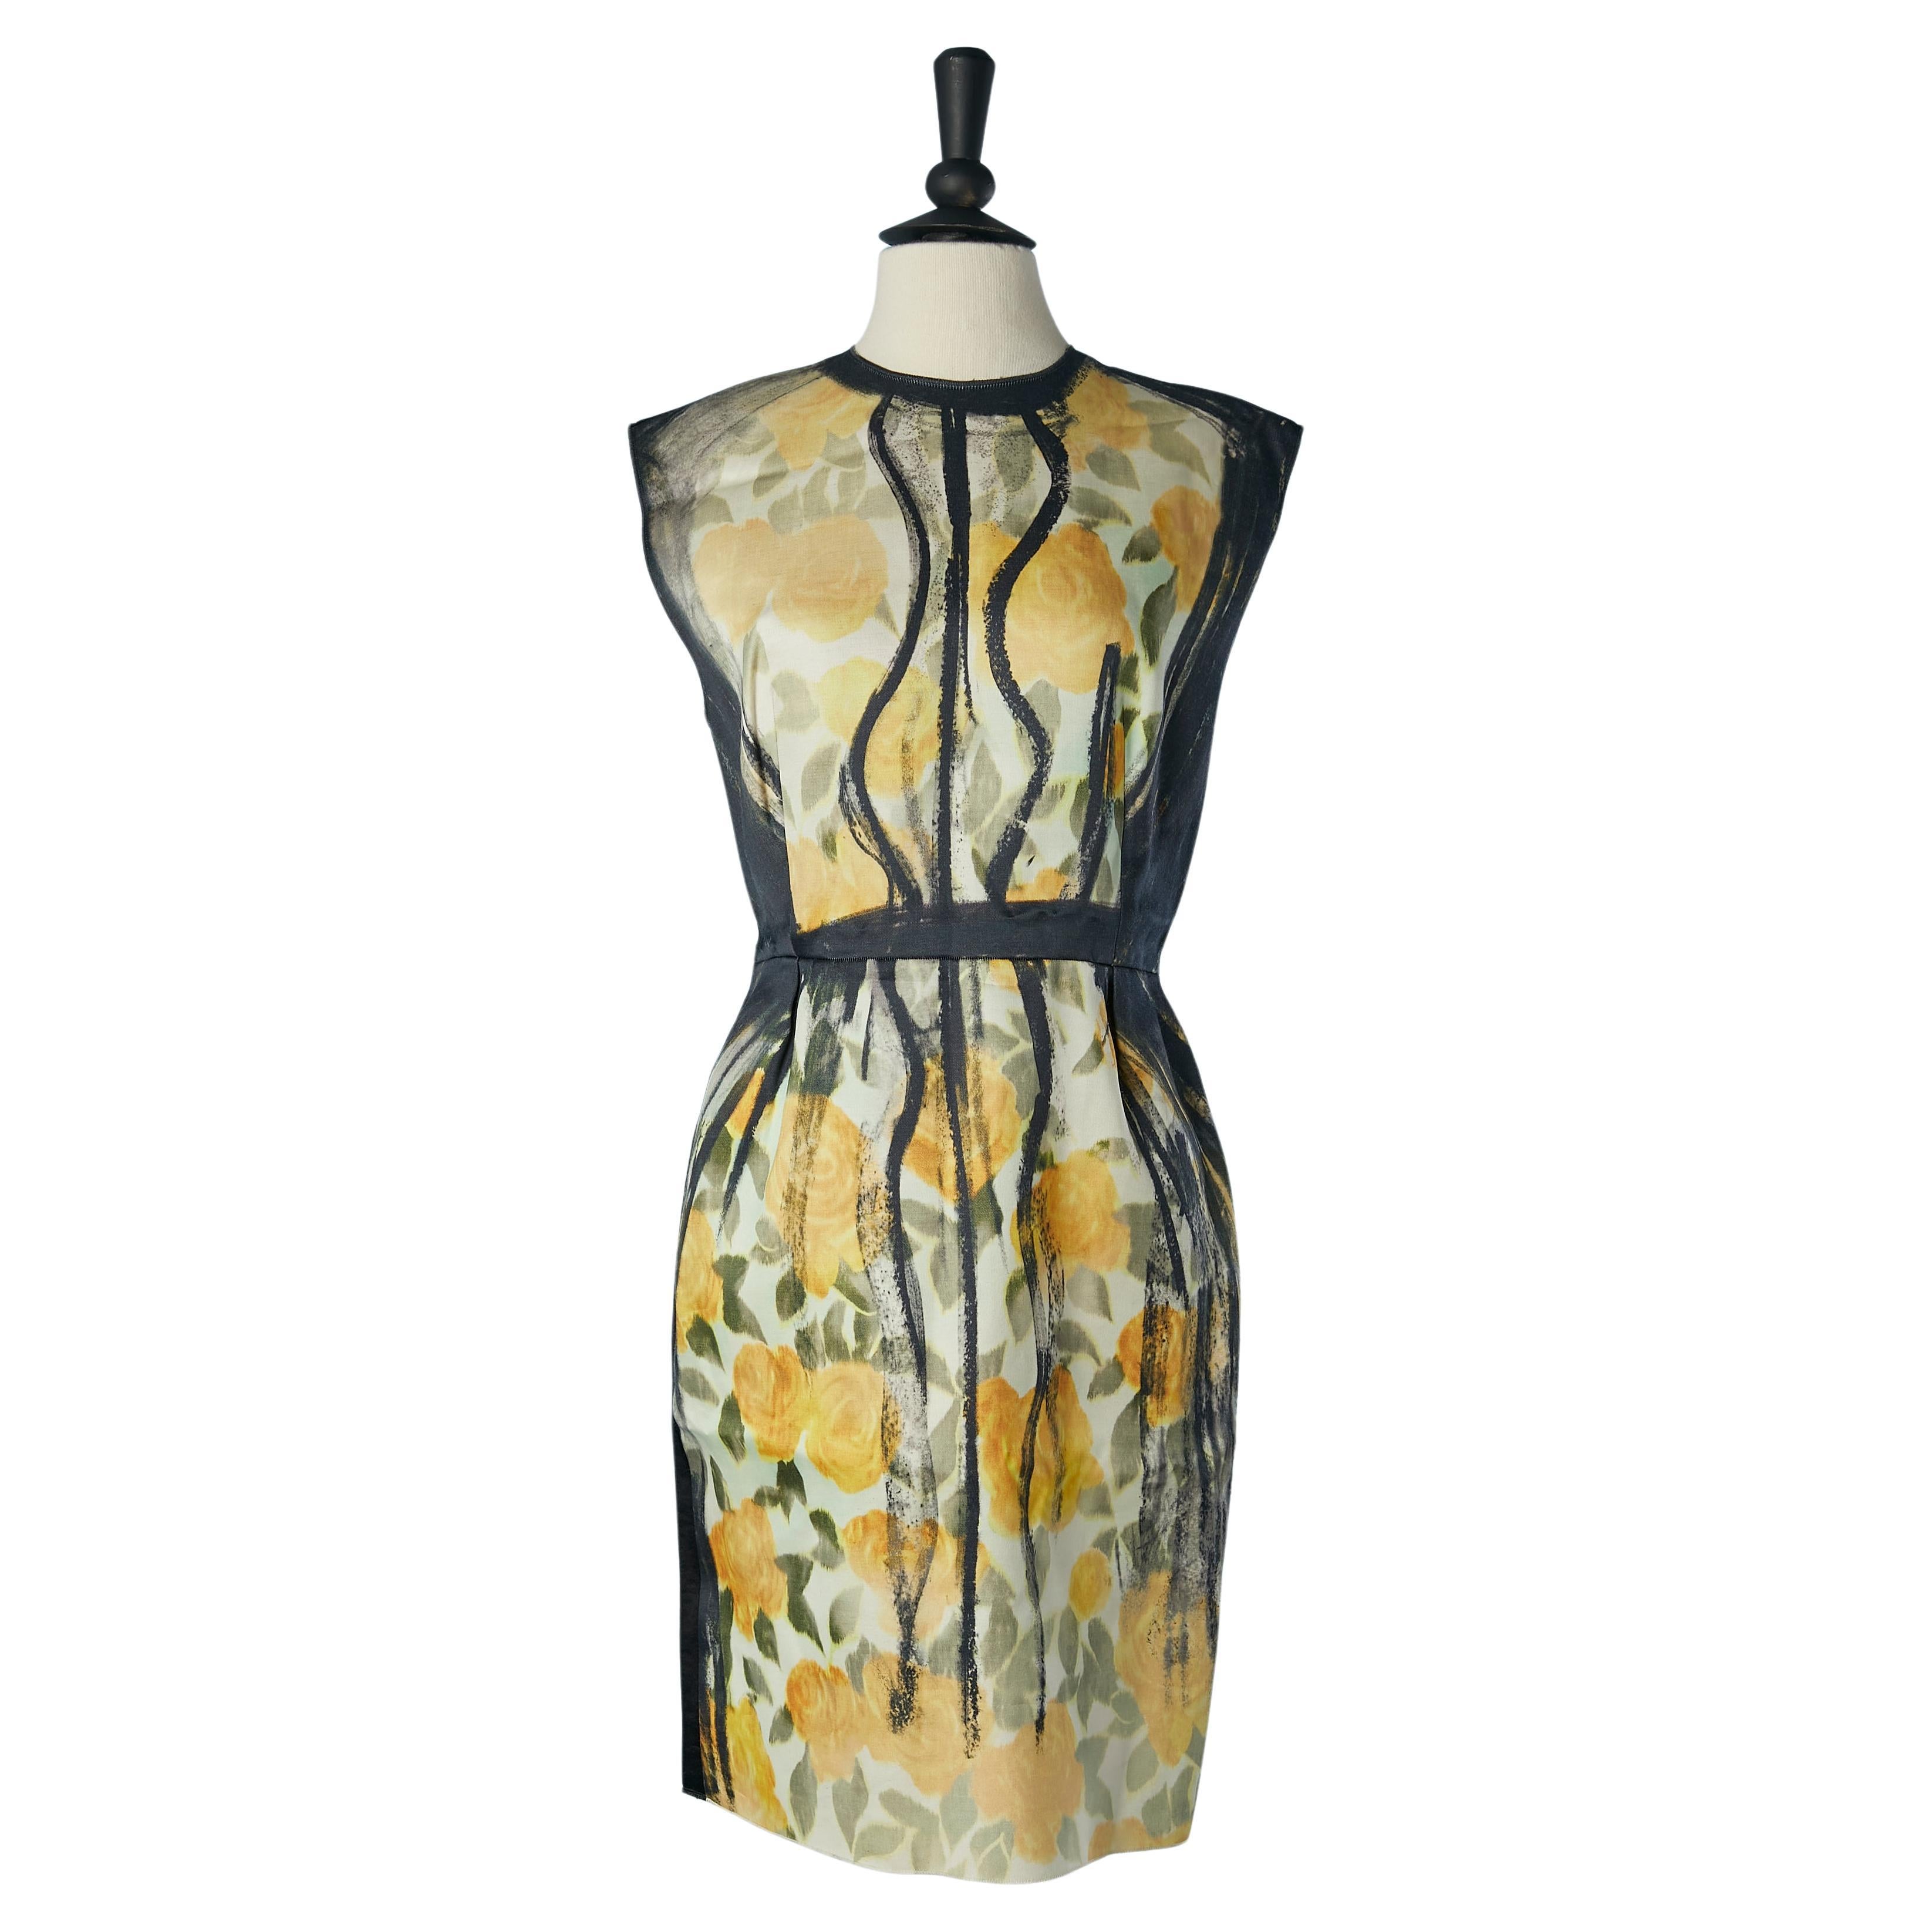 Printed sleeveless cocktail dress Lanvin by Alber Elbaz  "Les 10 Ans"  FW 2012 For Sale